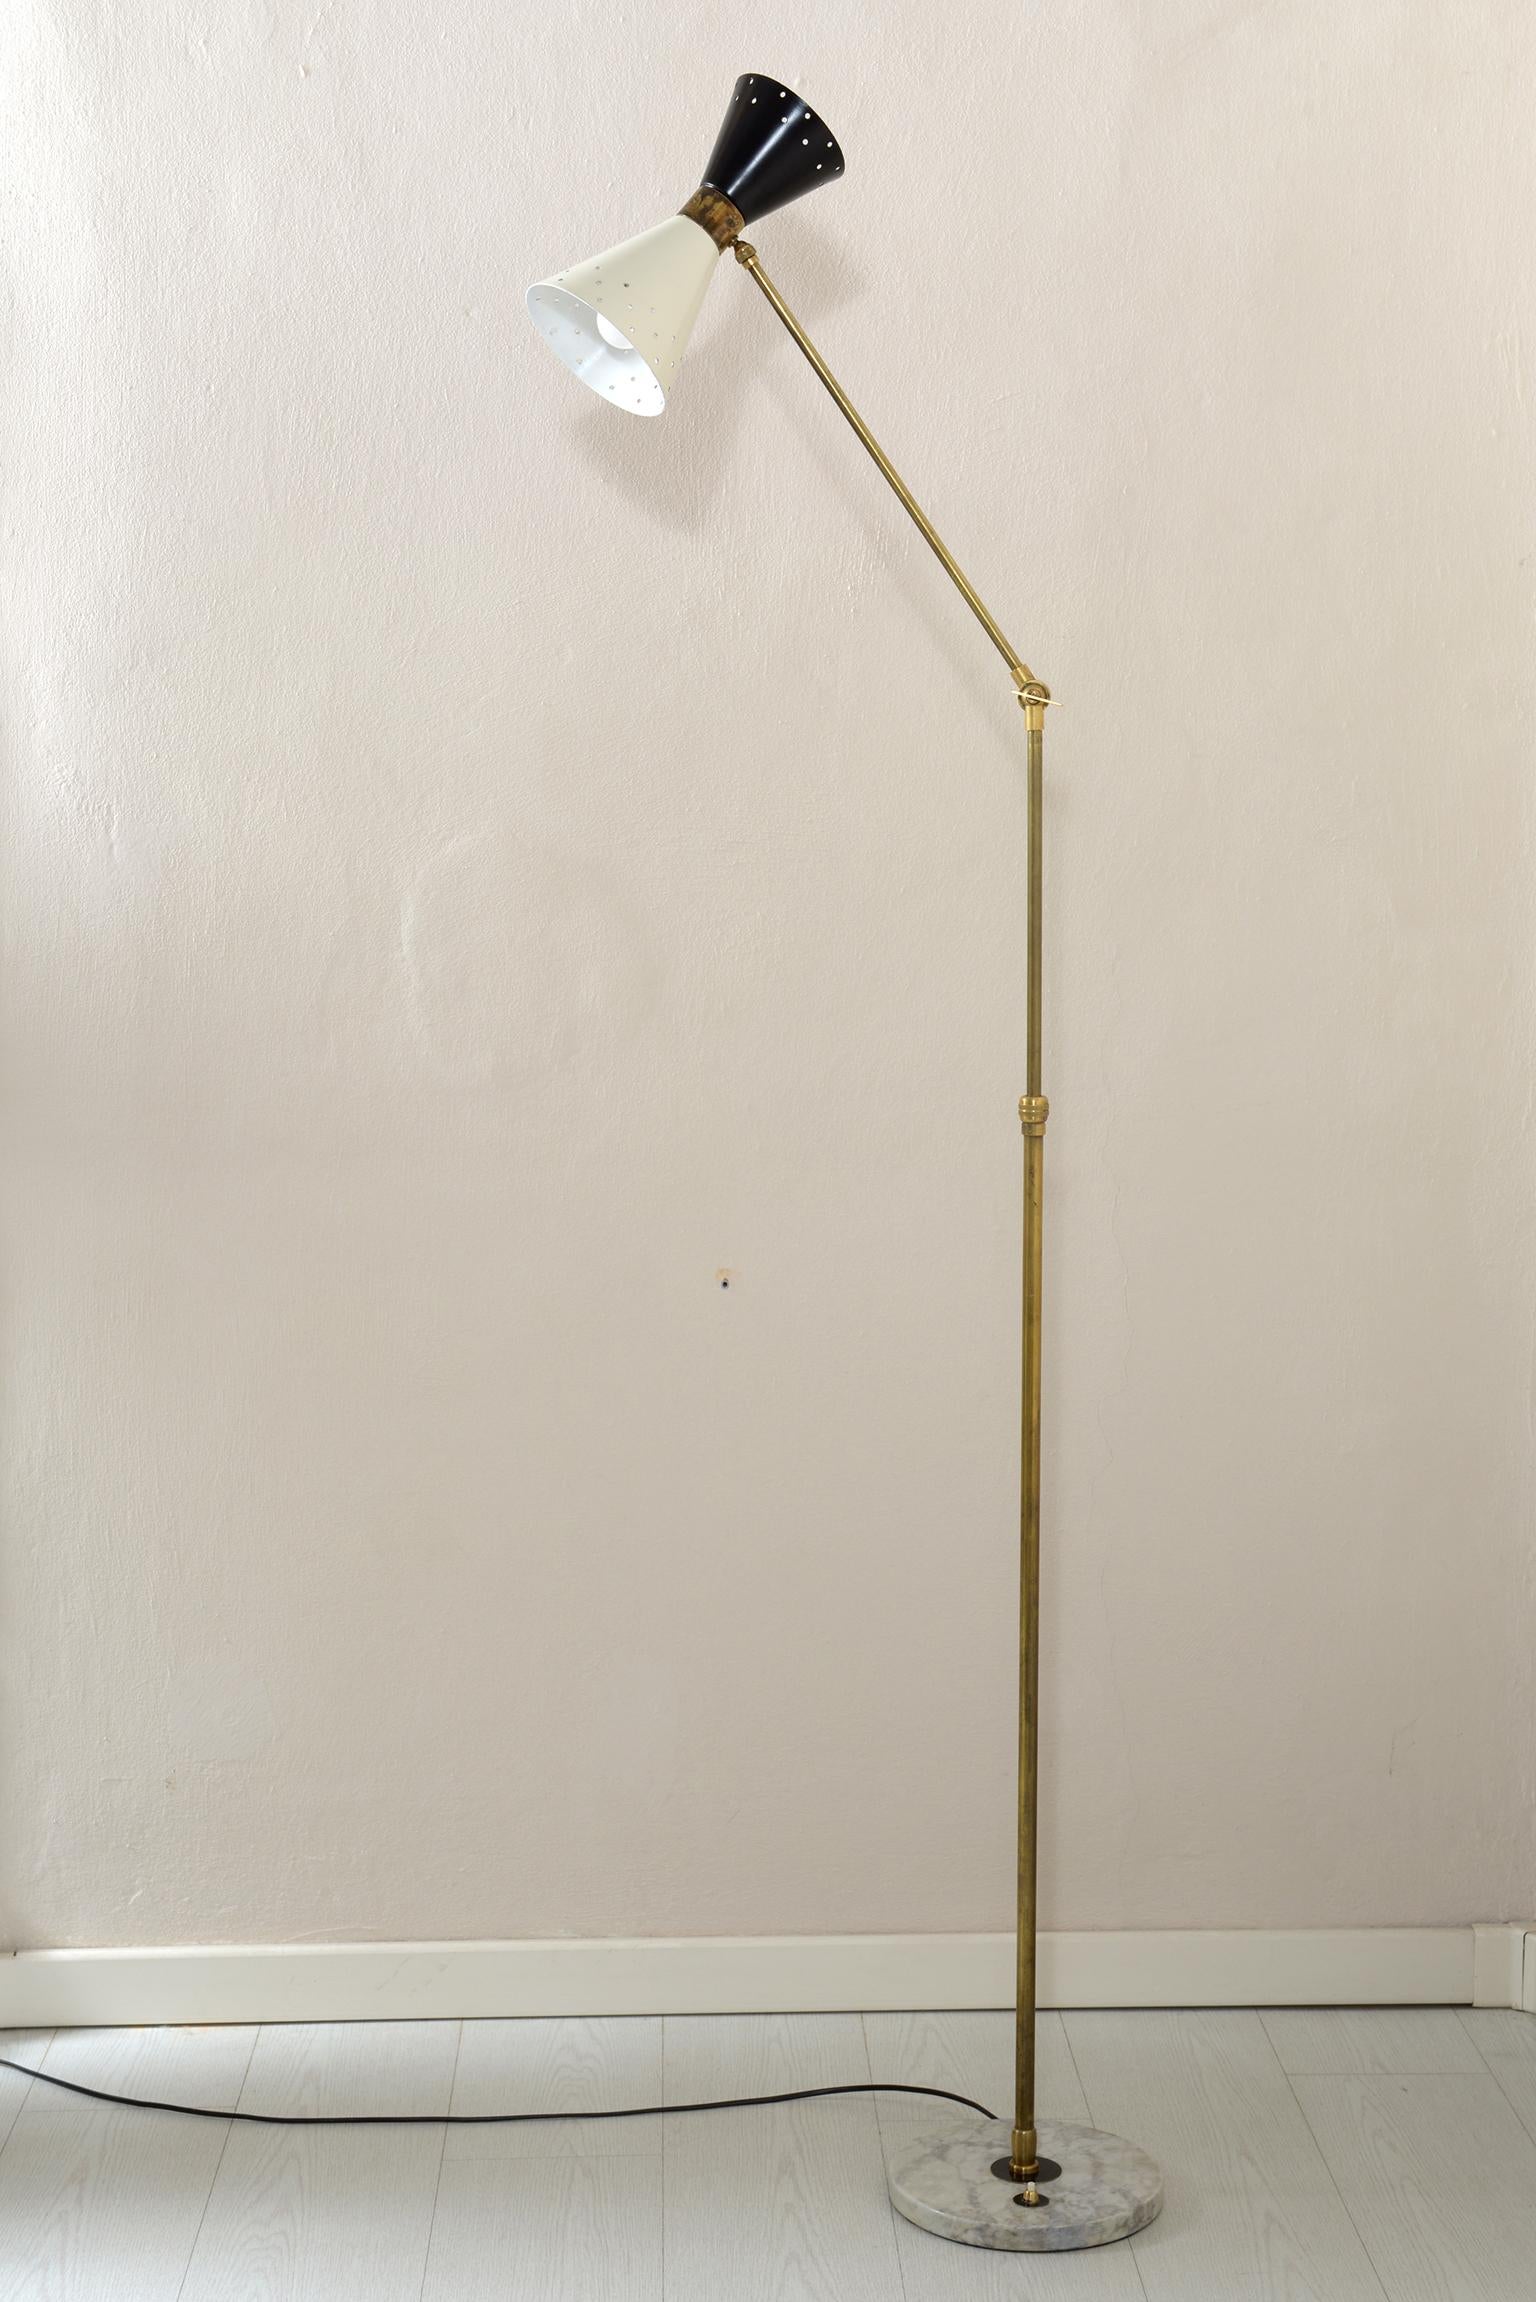 Brass floor lamp, marble base with electric switch and double diffuser in black and white lacquered aluminum.
The stem can be raised and lowered, the arm can be adjusted through a joint and locked with a screw wrench, the diffusers can be oriented